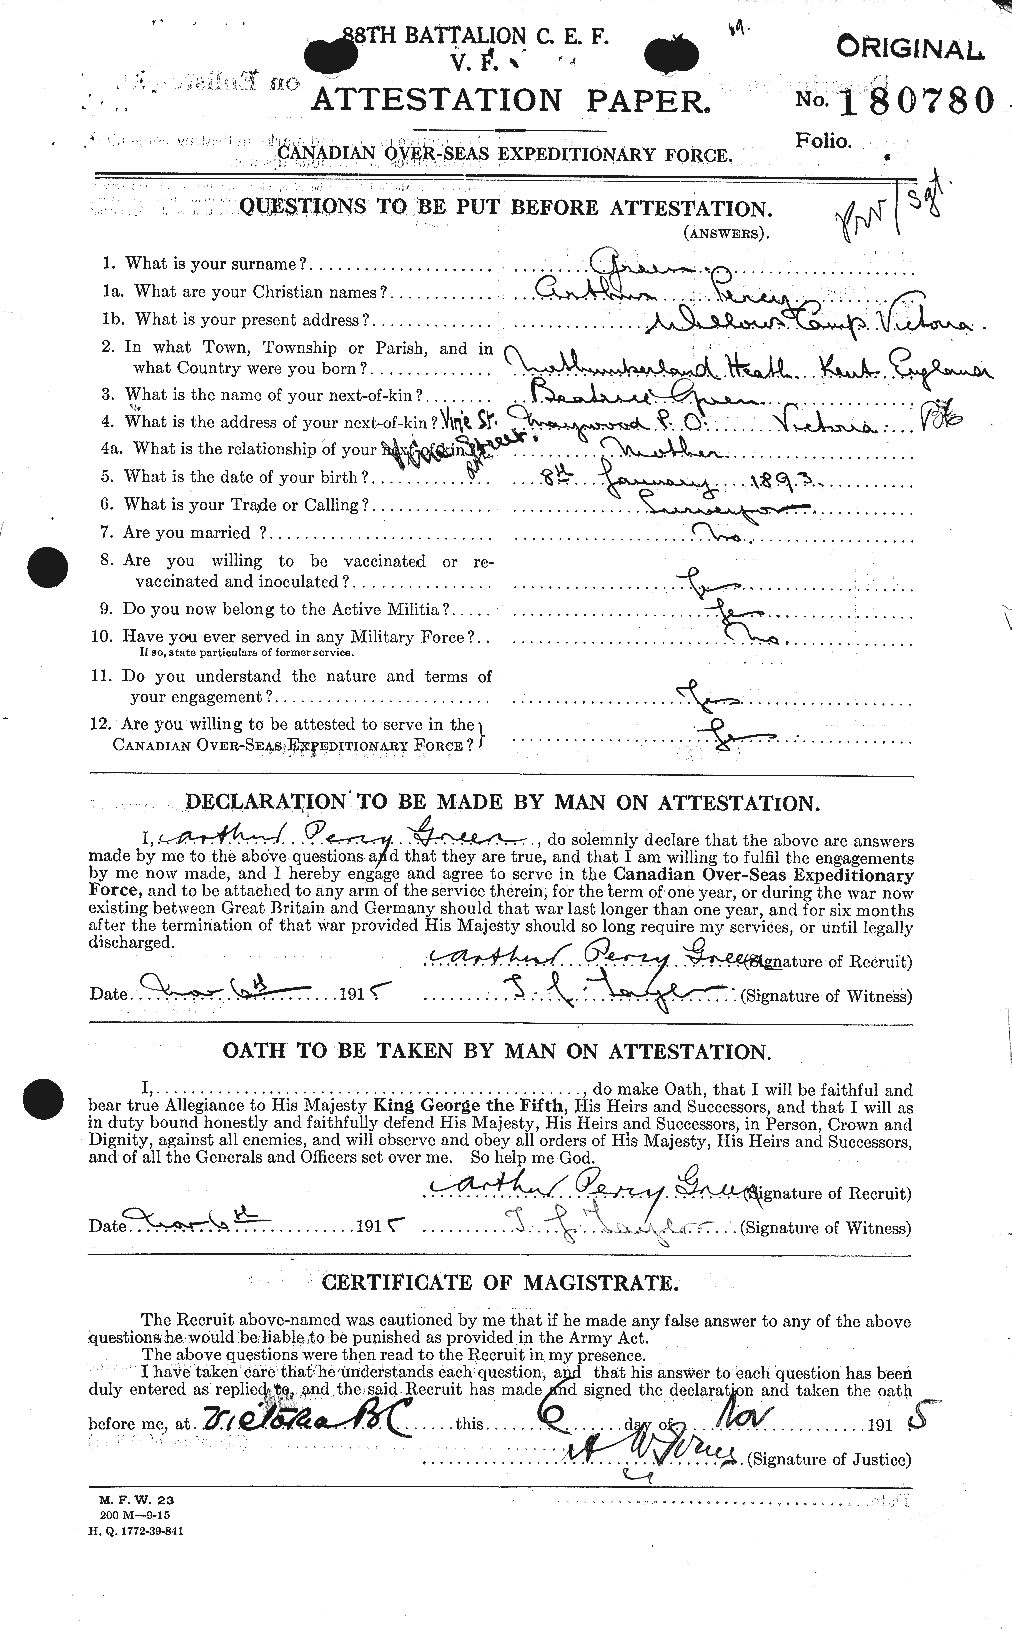 Personnel Records of the First World War - CEF 363849a